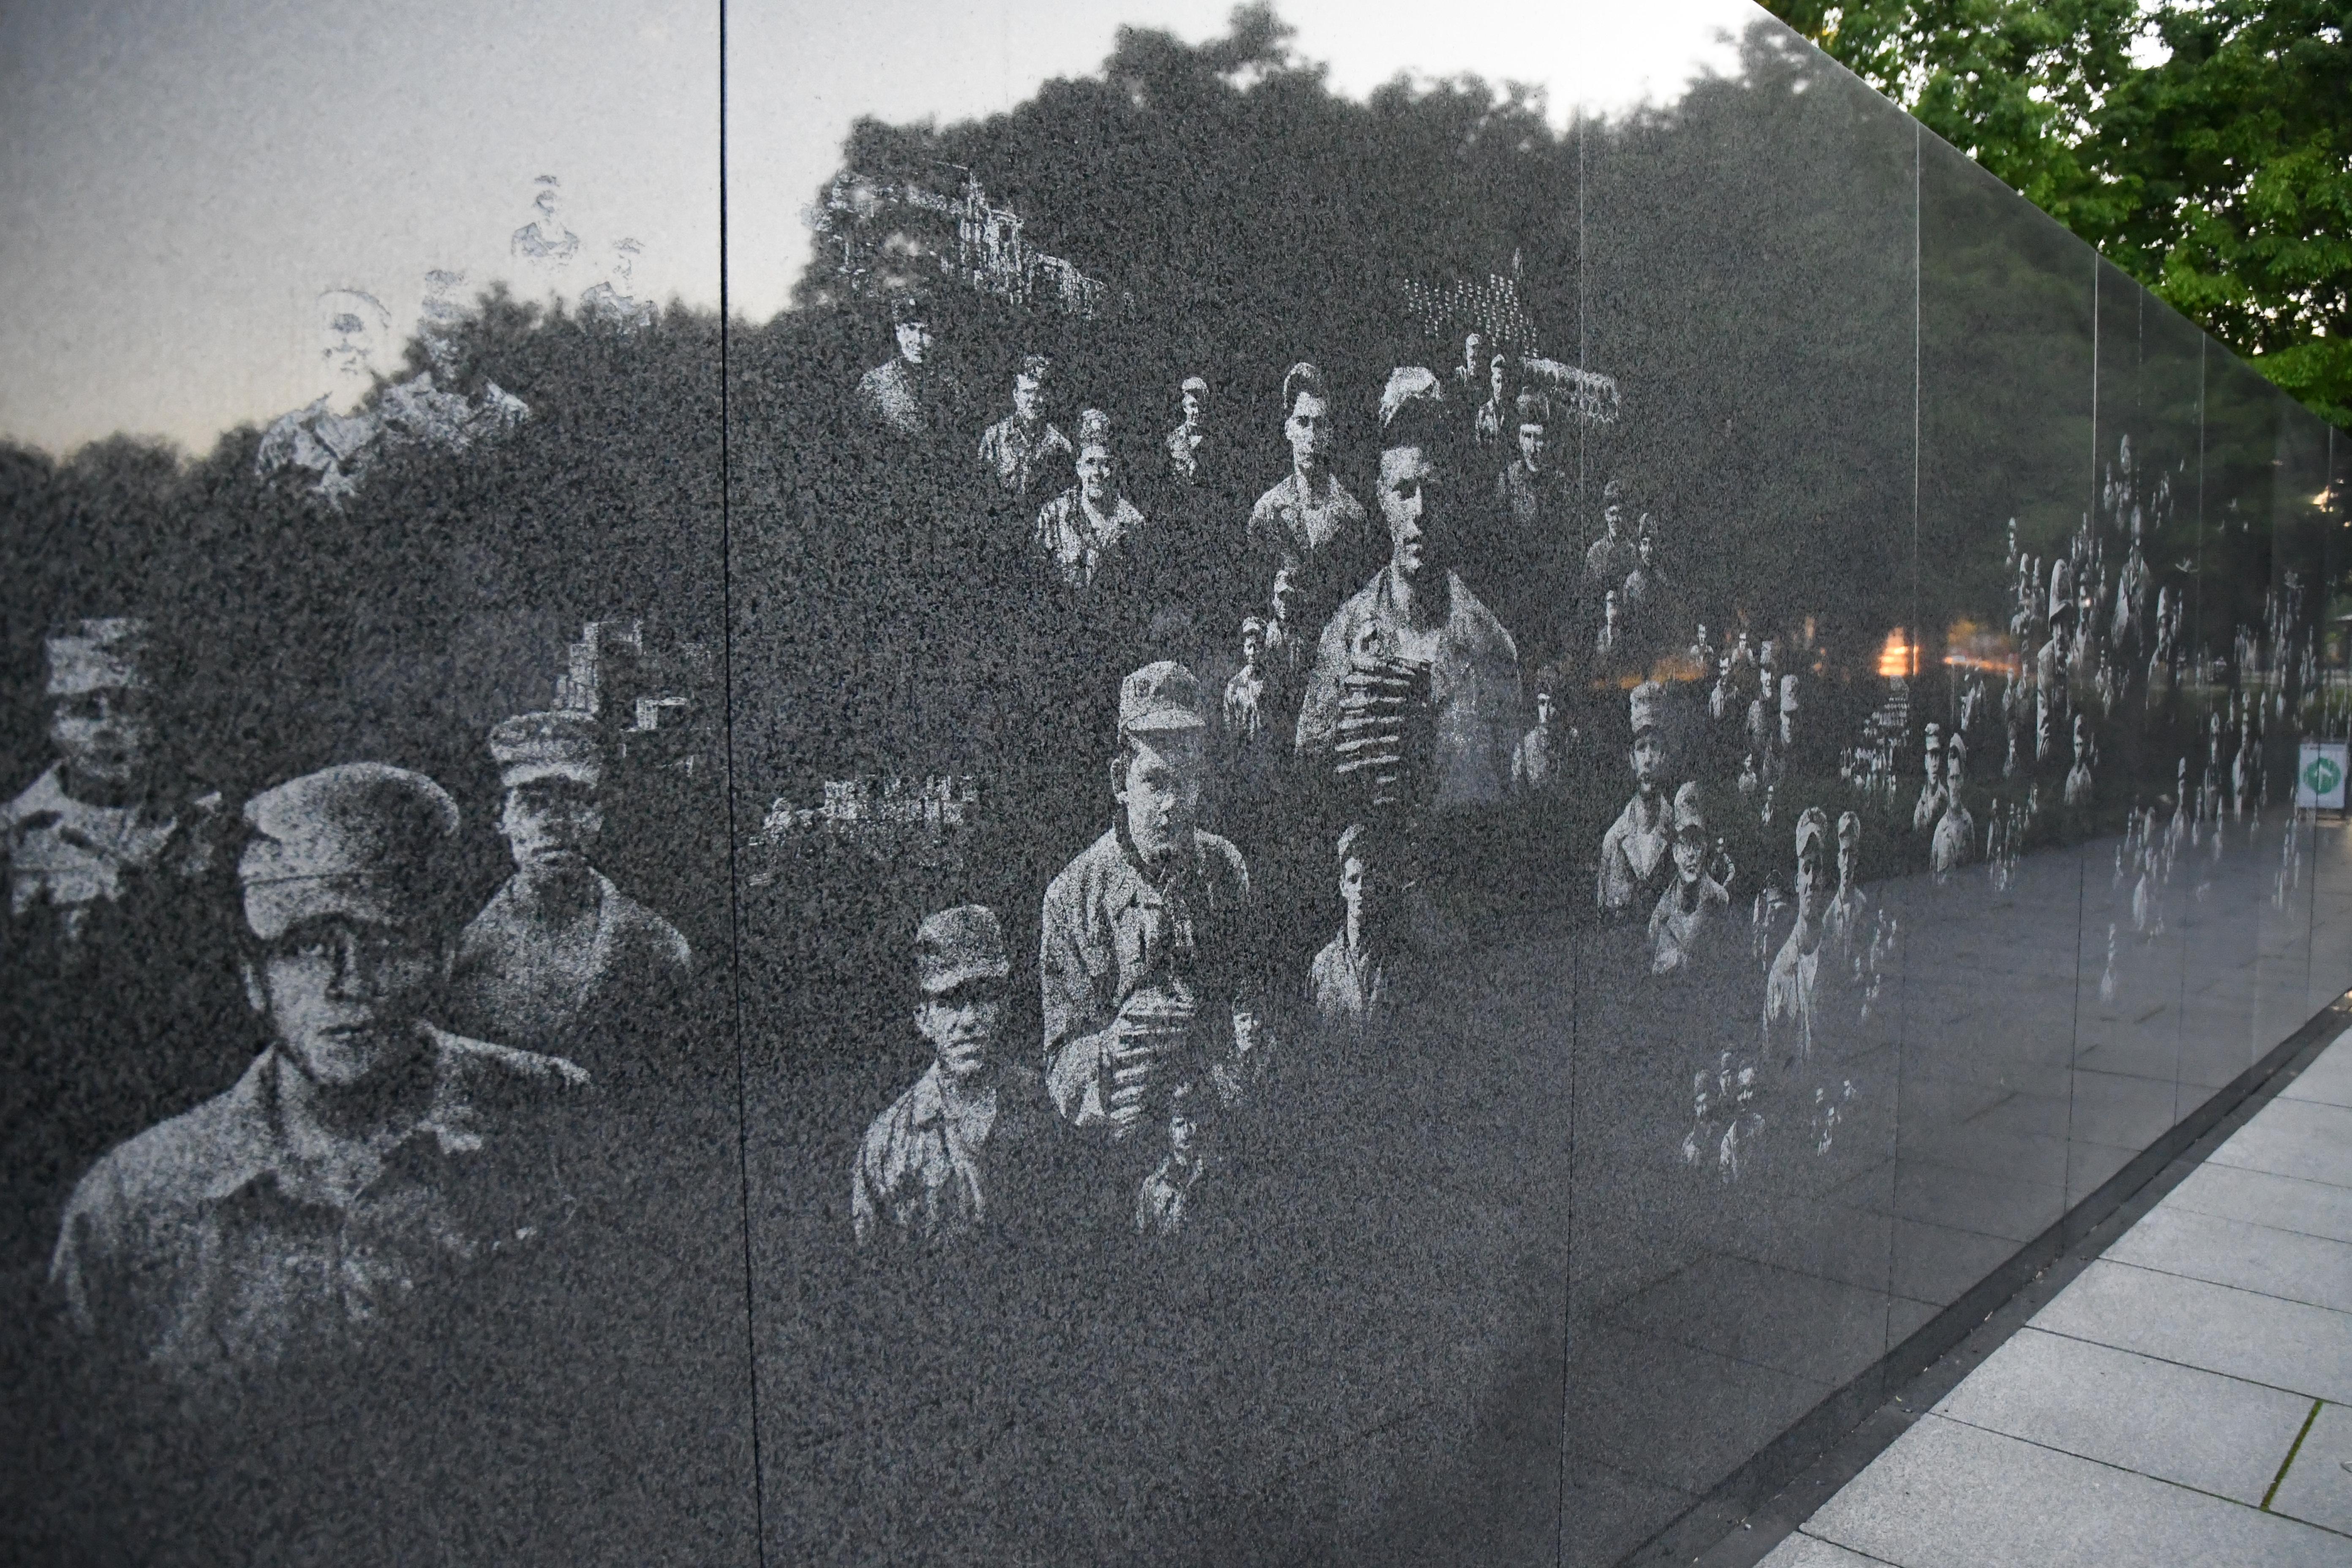 Faces of soldiers are etched onto a black granite wall